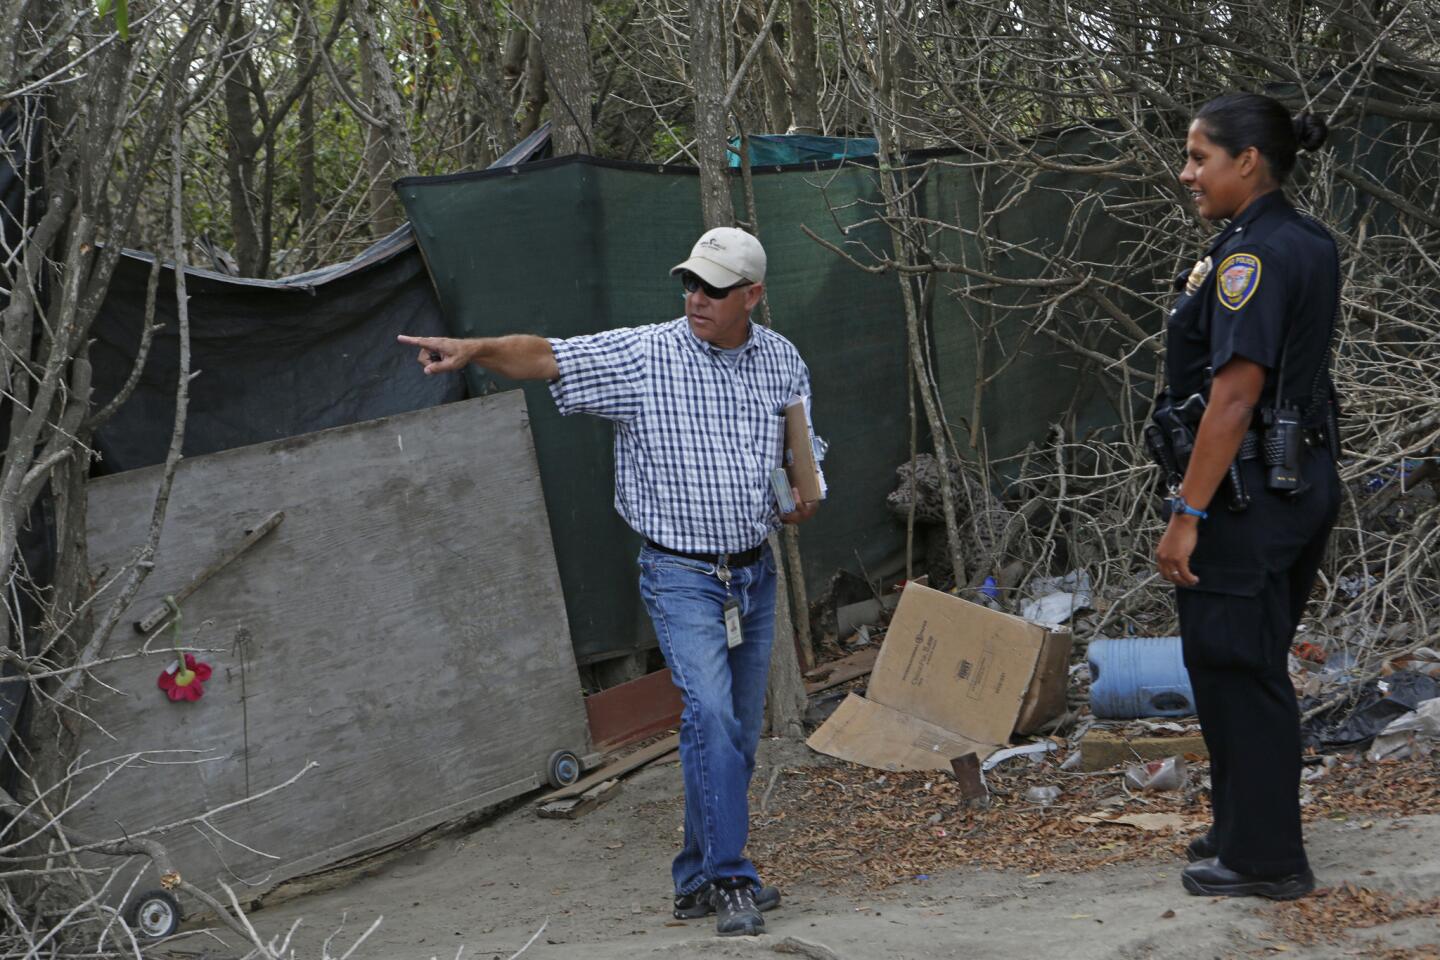 Community services manager of Ventura and Oxnard Peter Brown, left, at a homeless encampment on 5th Street in Oxnard.